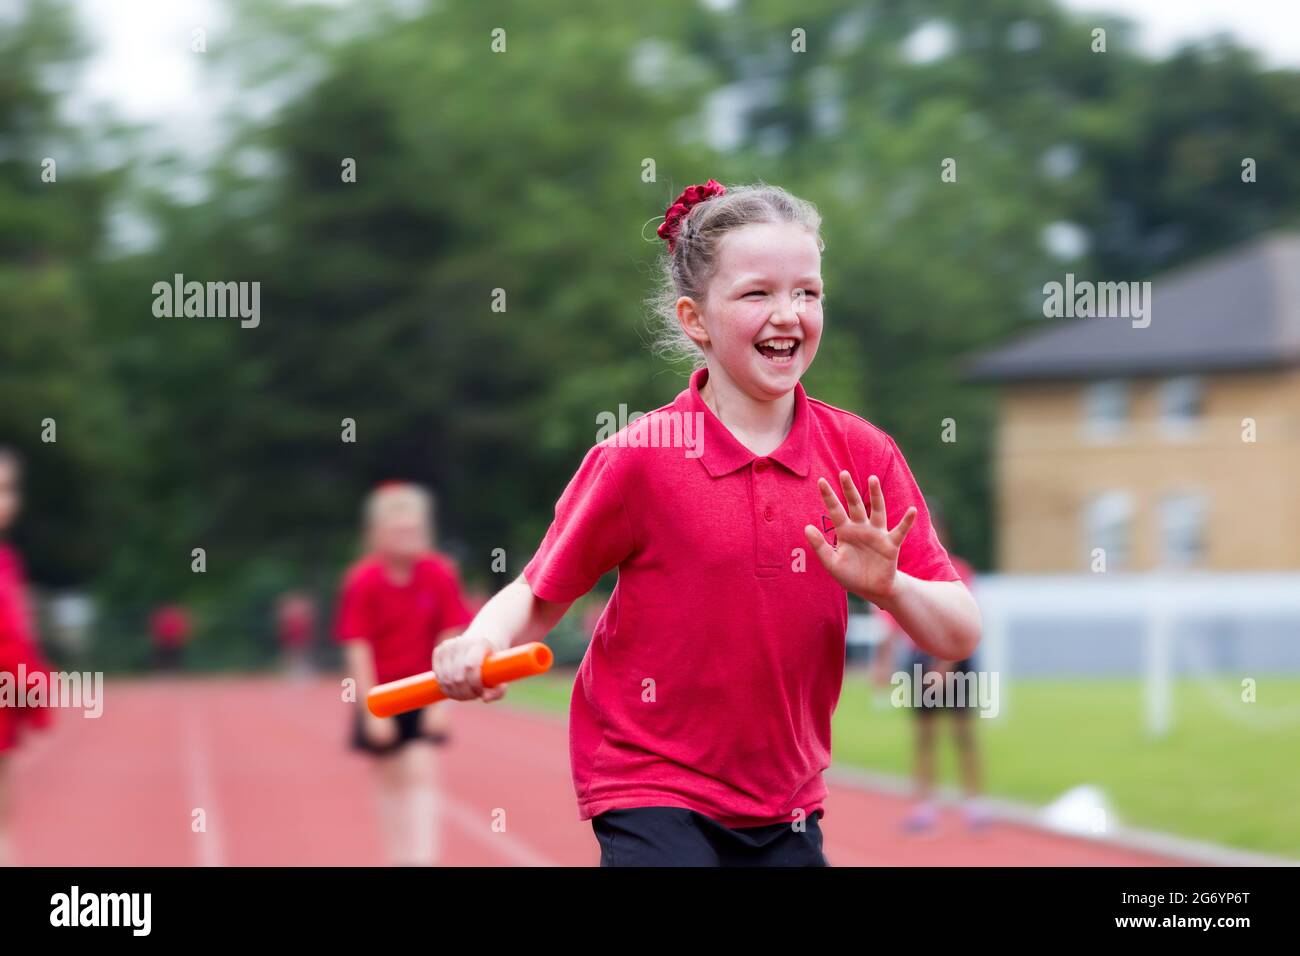 Primary year 4 school girl child / kid takes part in relay running race / sport on school sports day / summers / academic year / schools term end. Stock Photo